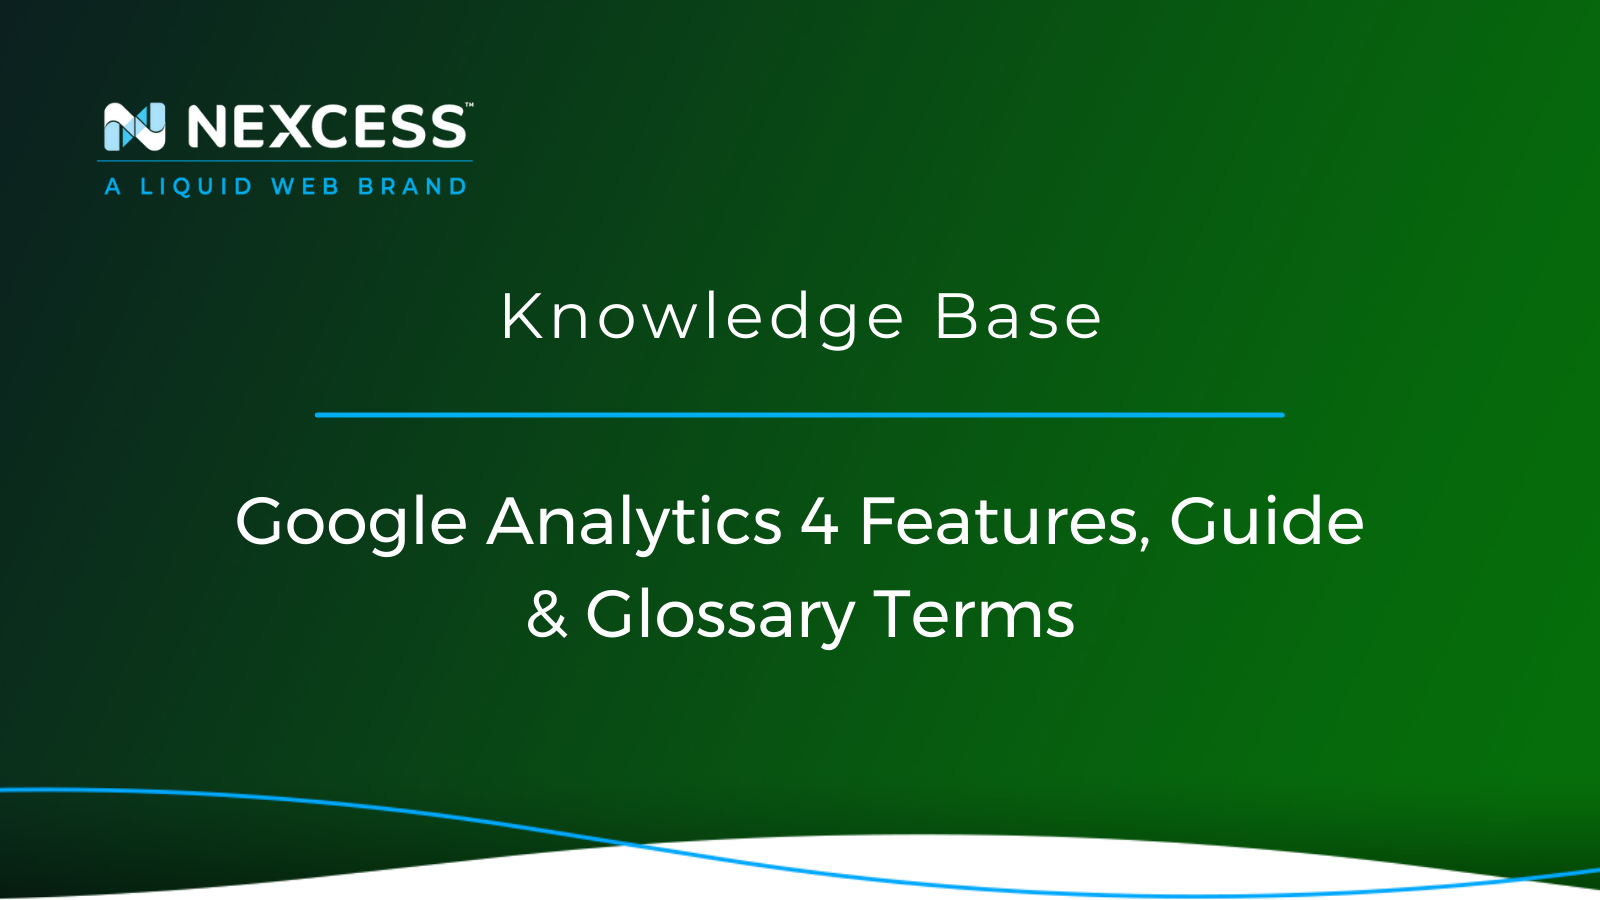 Google Analytics 4 Features, Guide & Glossary Terms